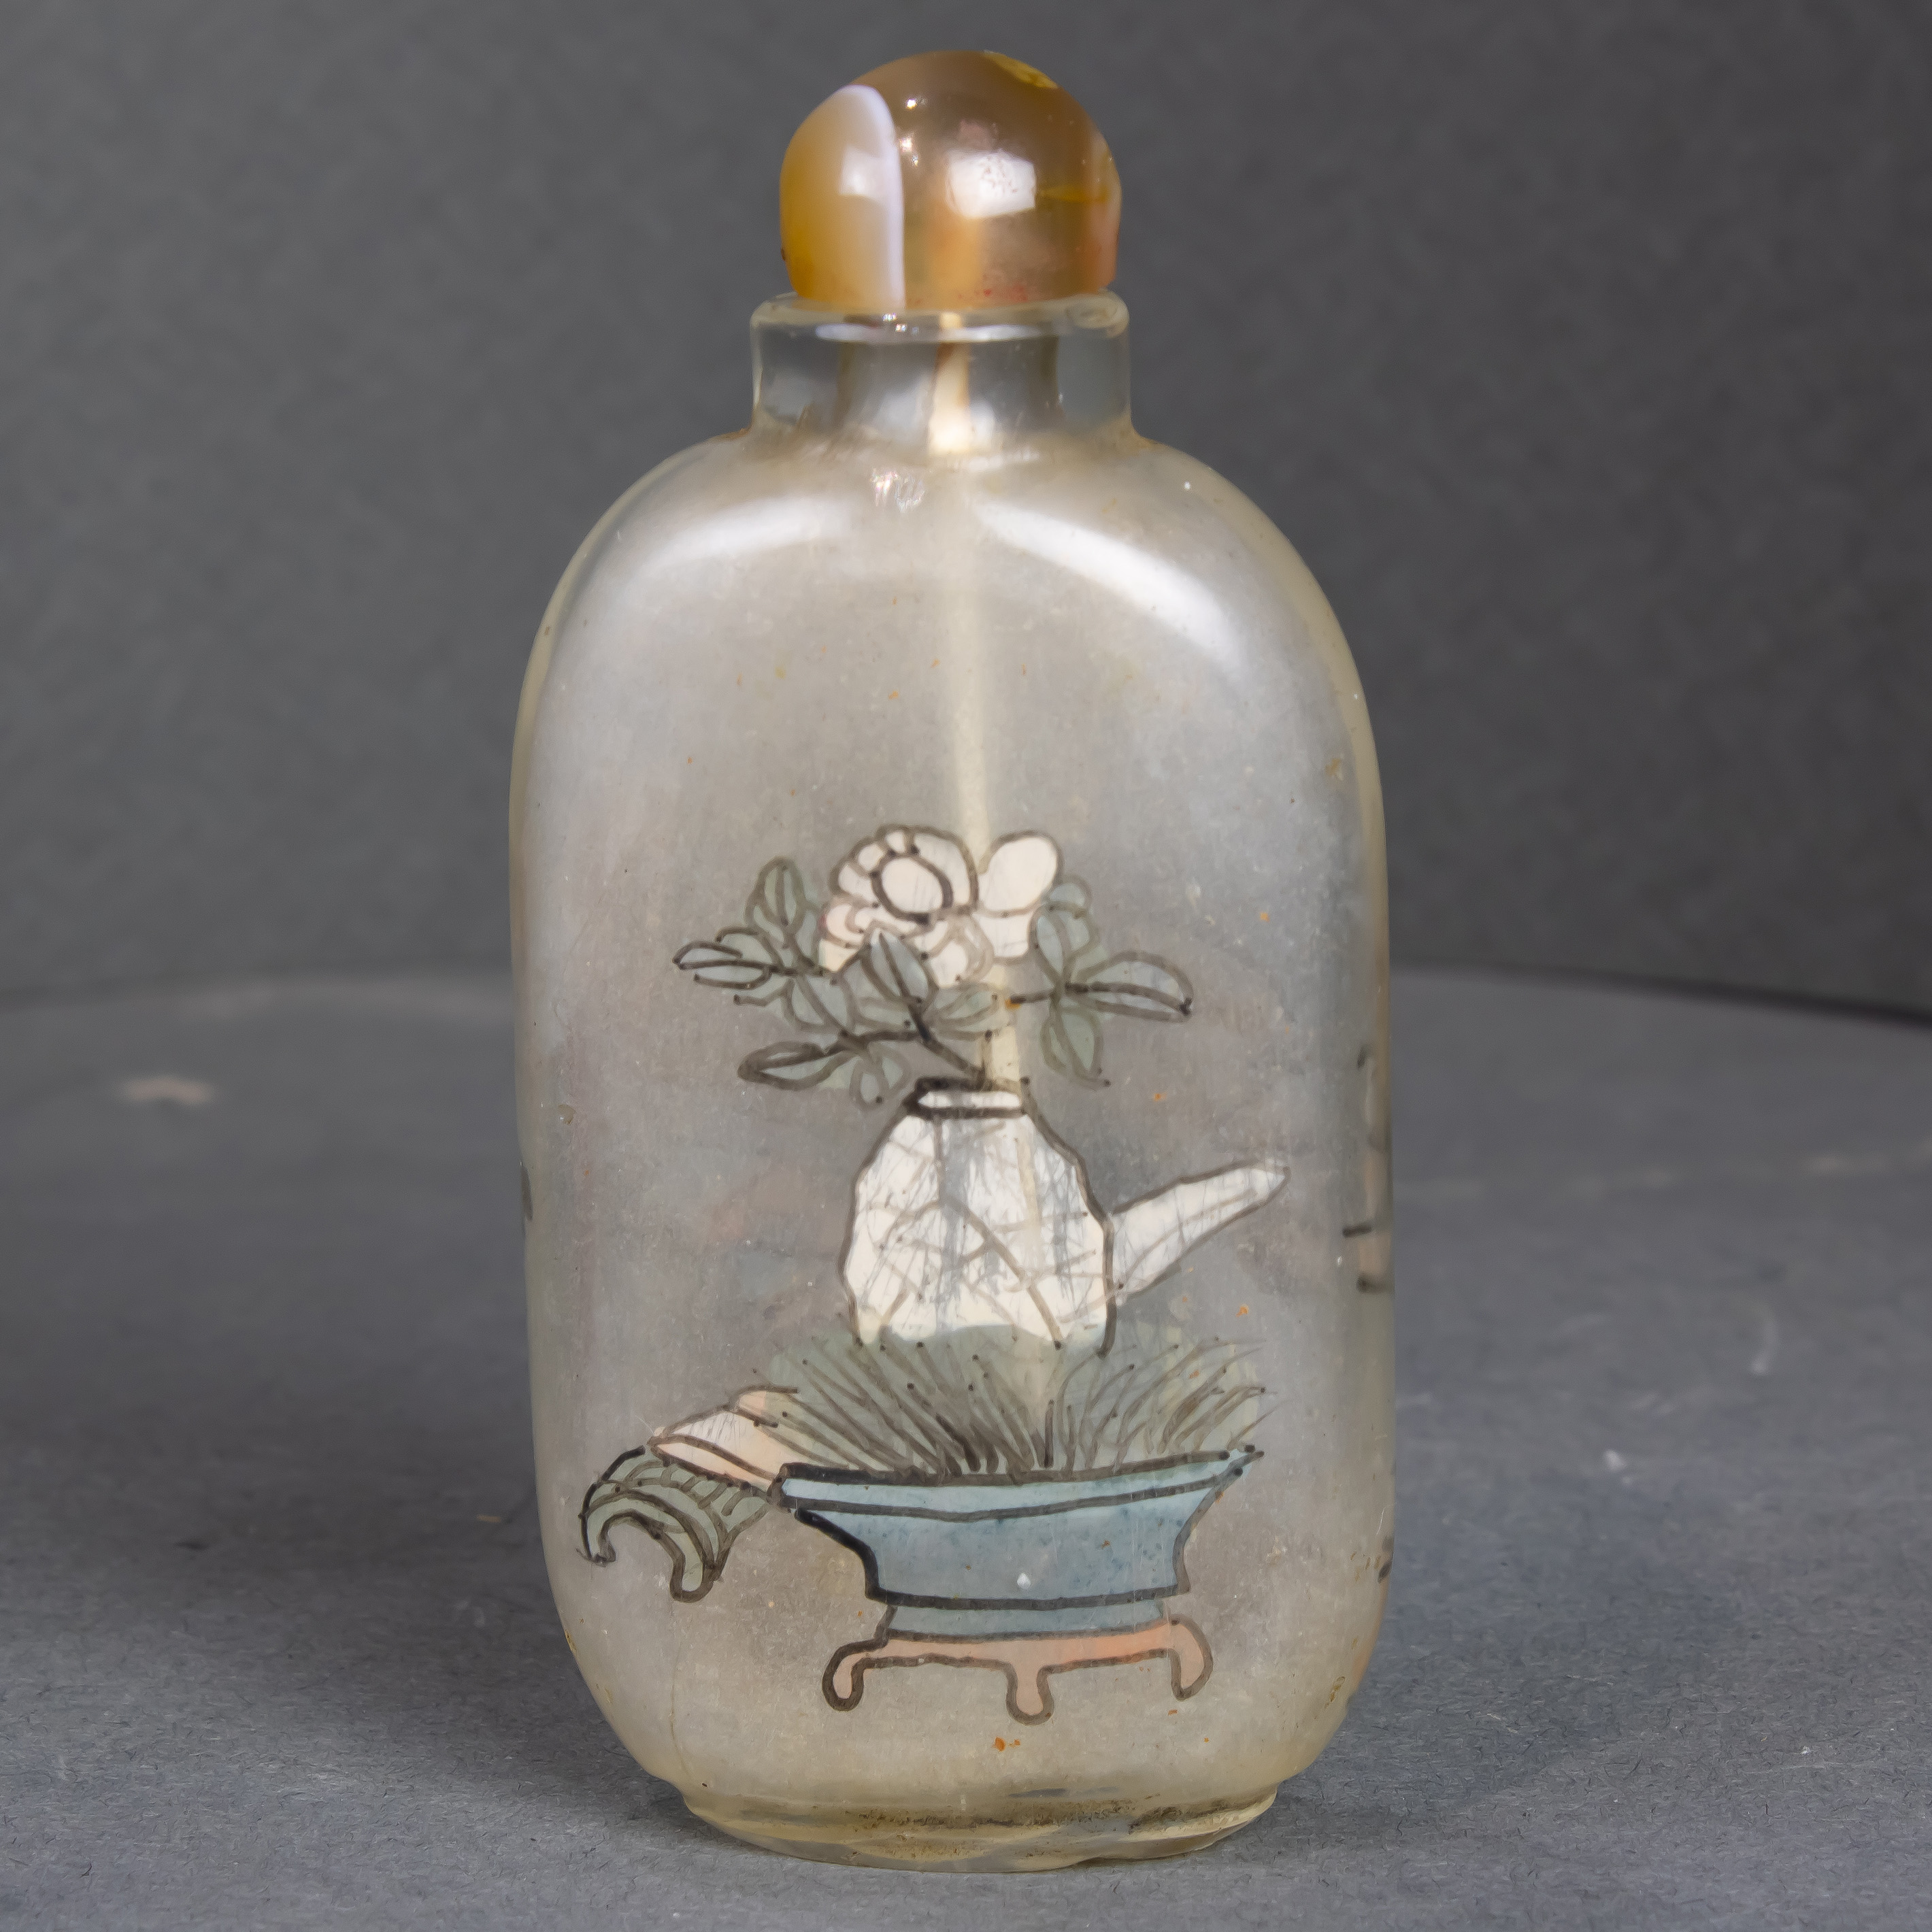 CHINESE REVERSE PAINTED SNUFF BOTTLE 3a4508